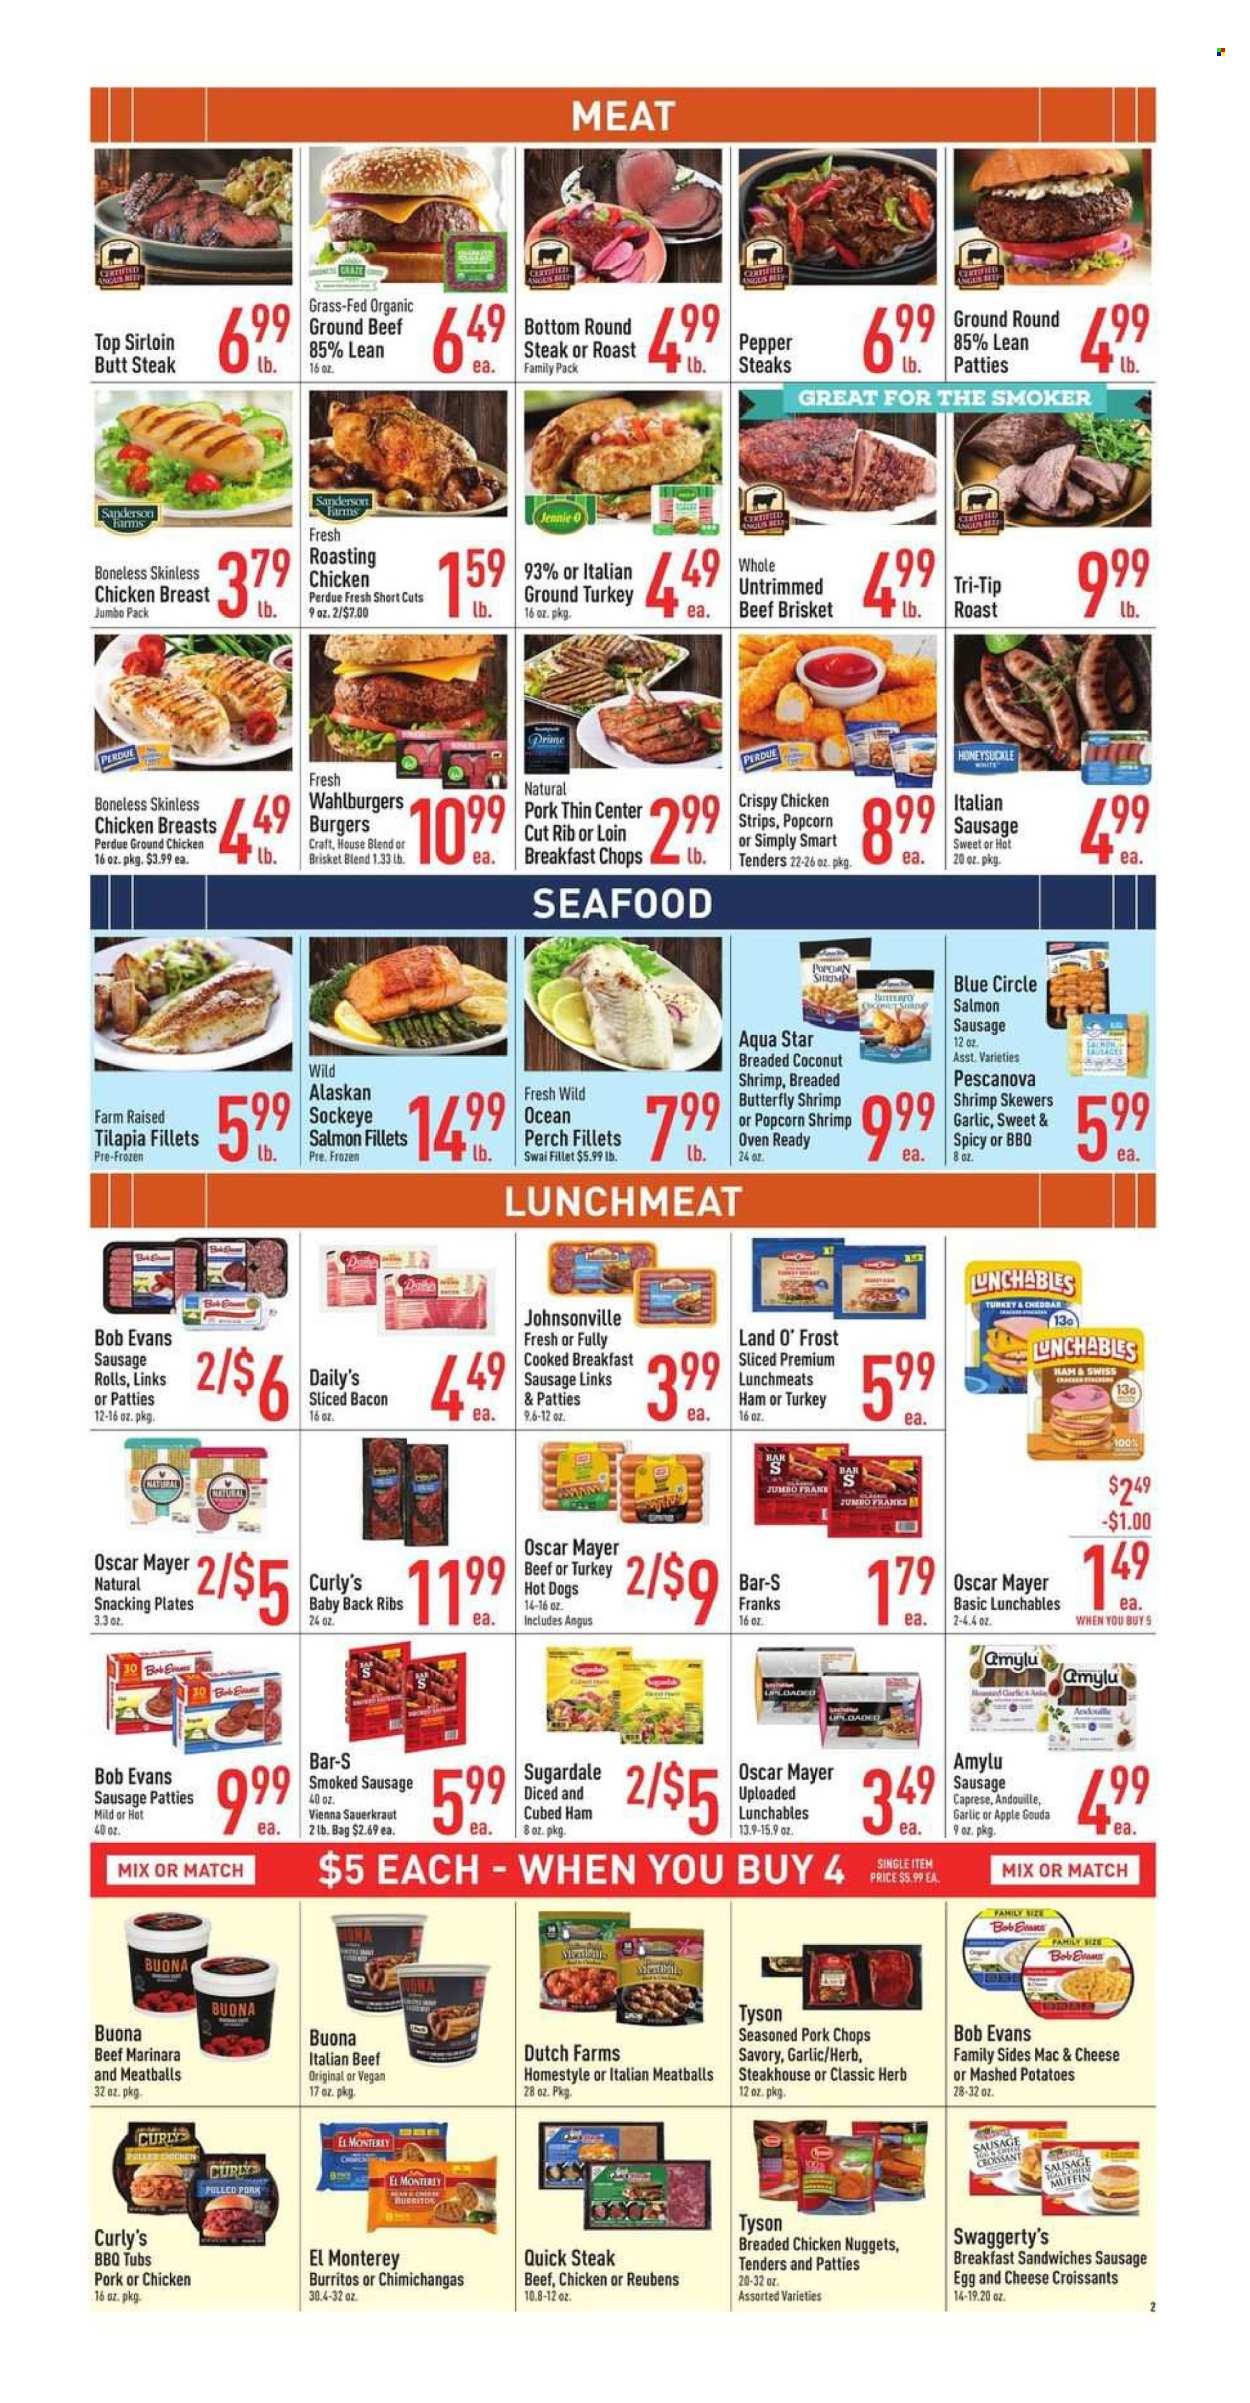 thumbnail - Strack & Van Til Flyer - 07/17/2024 - 07/23/2024 - Sales products - sausage rolls, croissant, muffin, fish fillets, salmon, salmon fillet, tilapia, perch, seafood, shrimps, swai fillet, shrimp skewers, macaroni & cheese, mashed potatoes, chicken roast, meatballs, sandwich, snack, nuggets, hamburger, fried chicken, chicken nuggets, burrito, chicken strips, Perdue®, Lunchables, Bob Evans, pulled pork, Sugardale, brisket, ready meal, breaded chicken, bacon, ham, chicken breasts, Johnsonville, Oscar Mayer, smoked sausage, frankfurters, lunch meat, gouda, eggs, strips, salty snack, sauerkraut, pickled cabbage, beef meat, ground beef, steak, round steak, beef brisket, sausage patties, pork chops, pork meat, pork ribs, pork back ribs. Page 2.